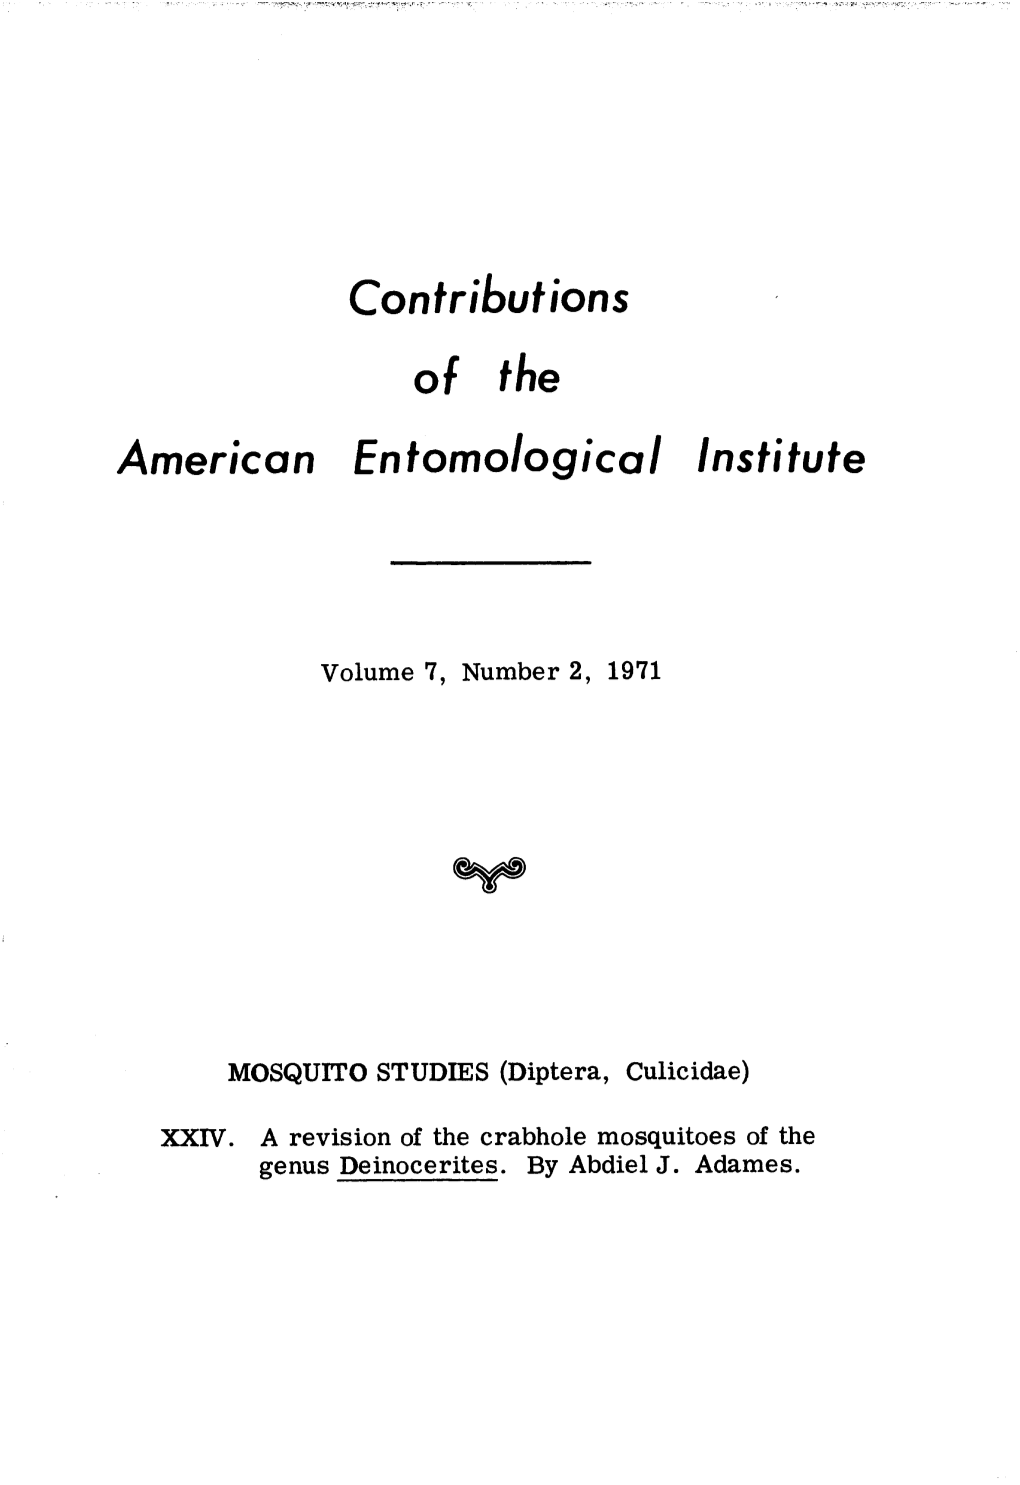 Mosquito Studies. a Revision of the Crabhole Mosquites of the Genus